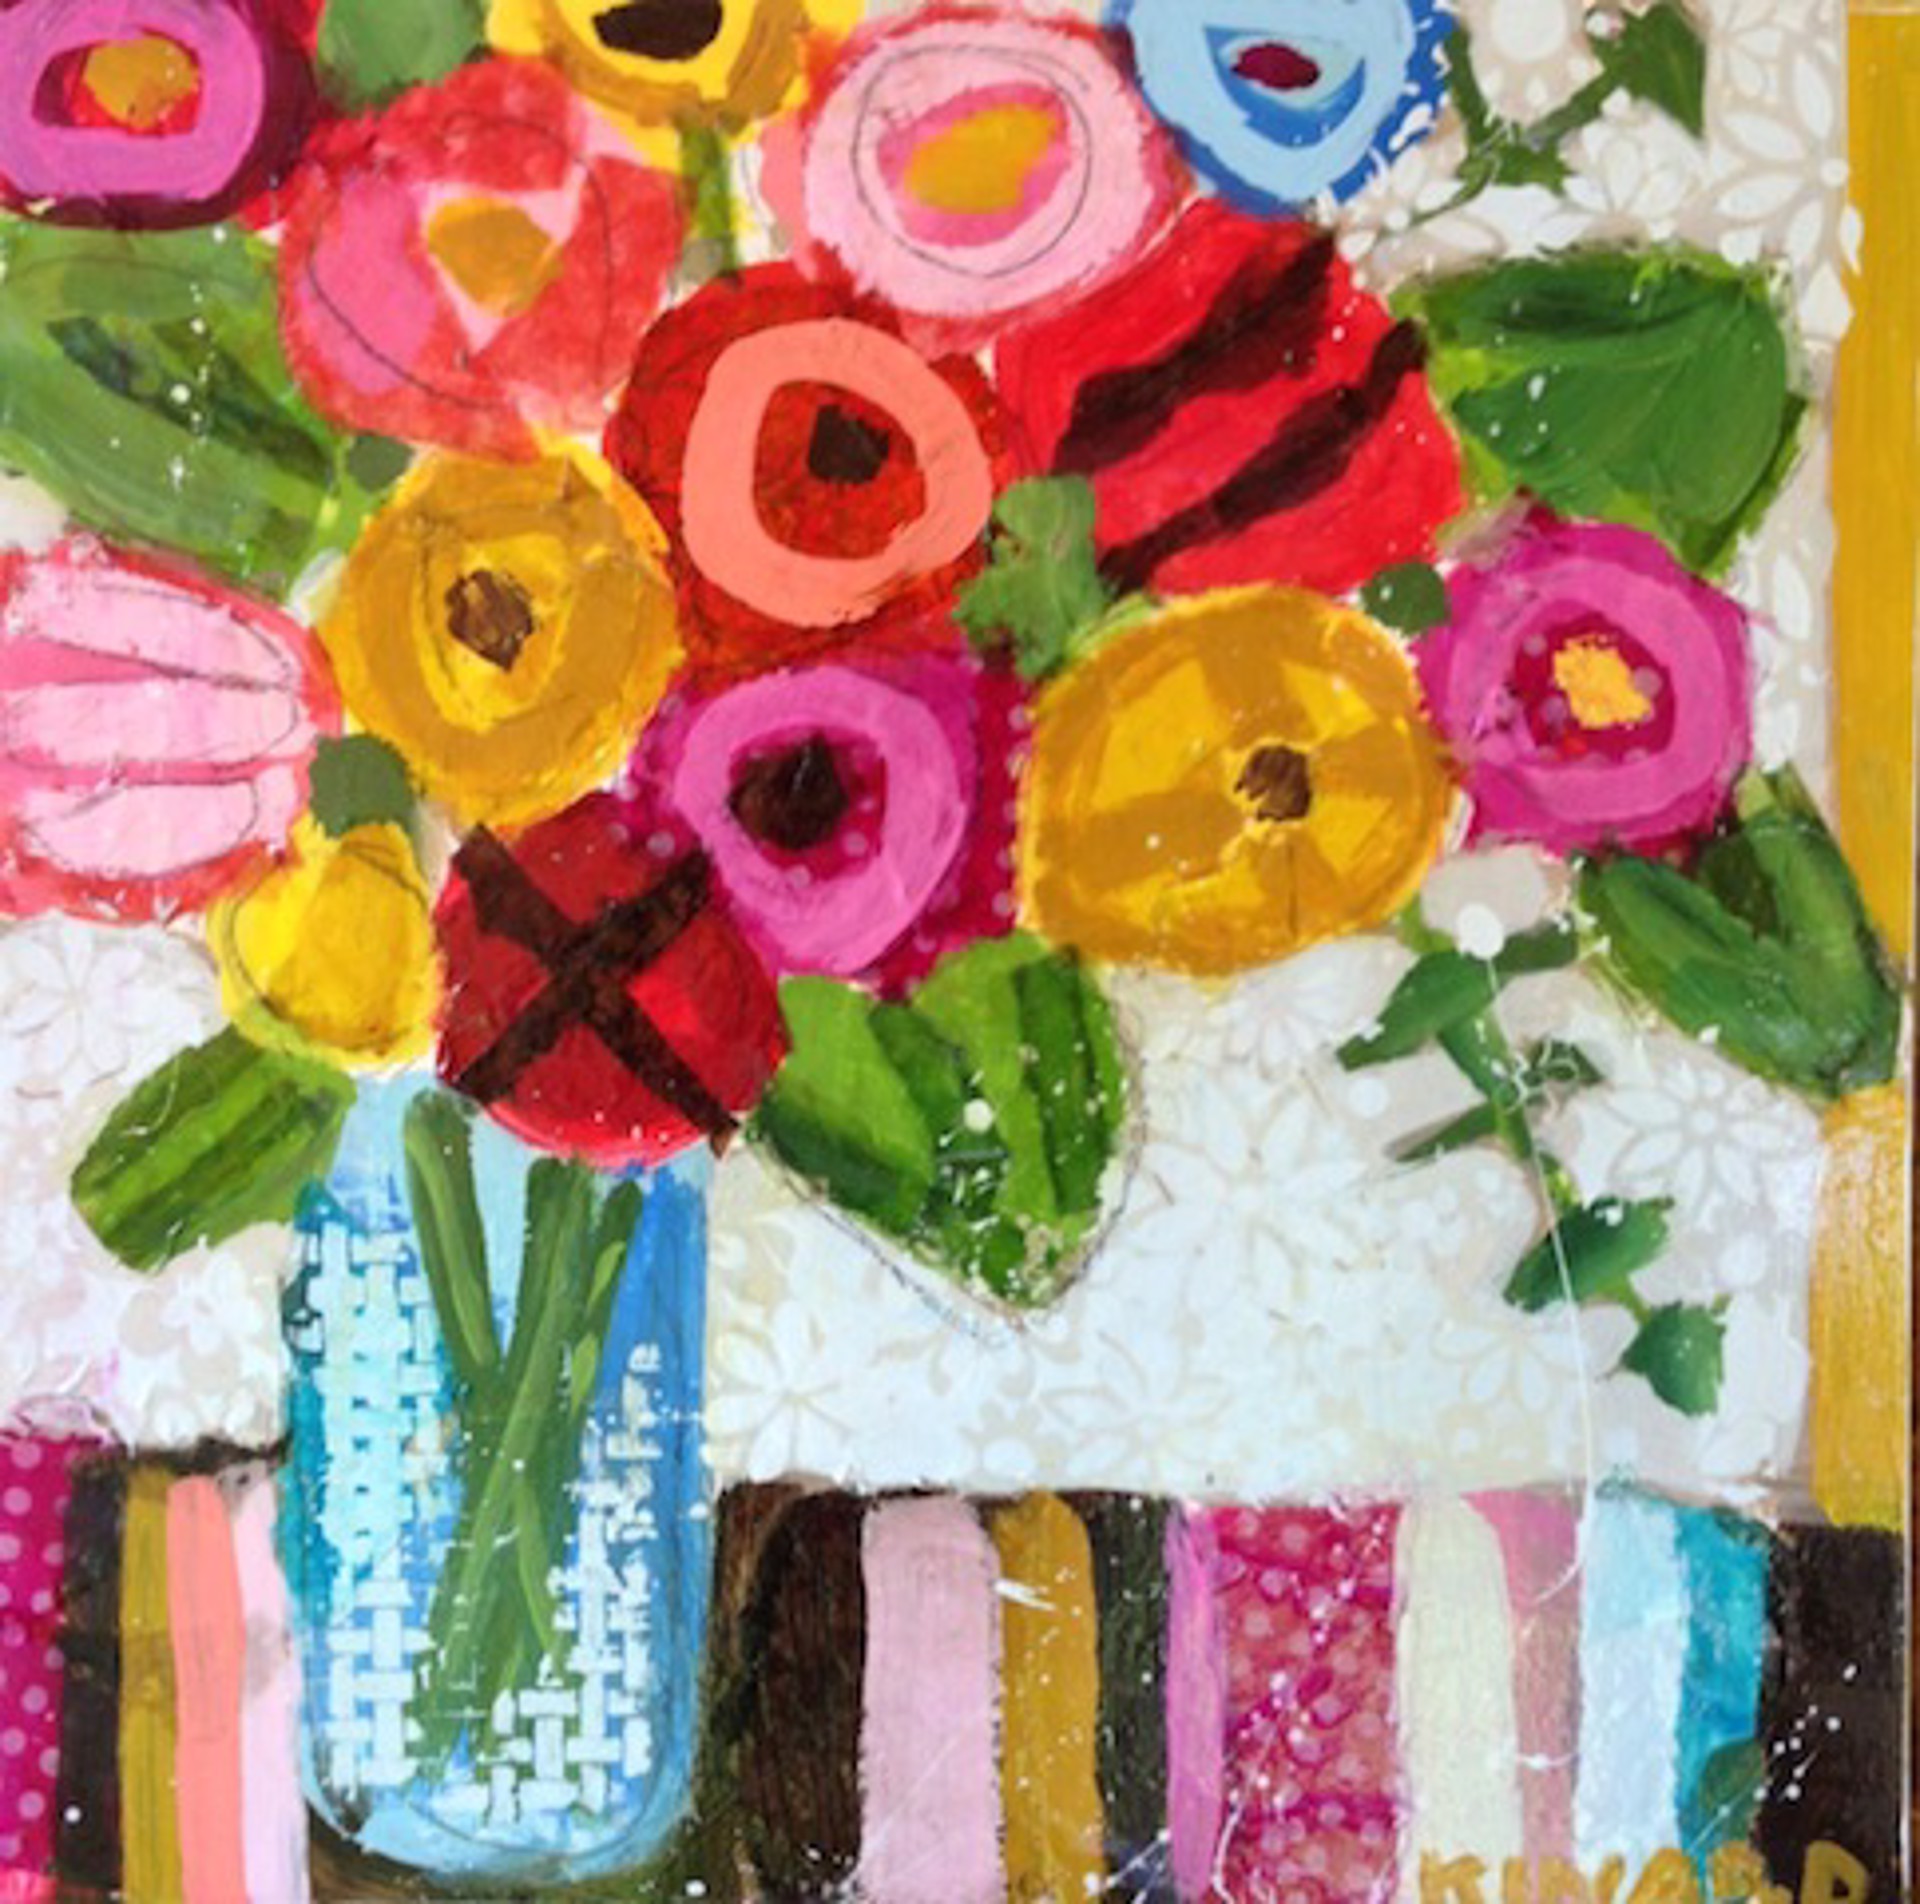 Flowers and Stripes by Christy Kinard